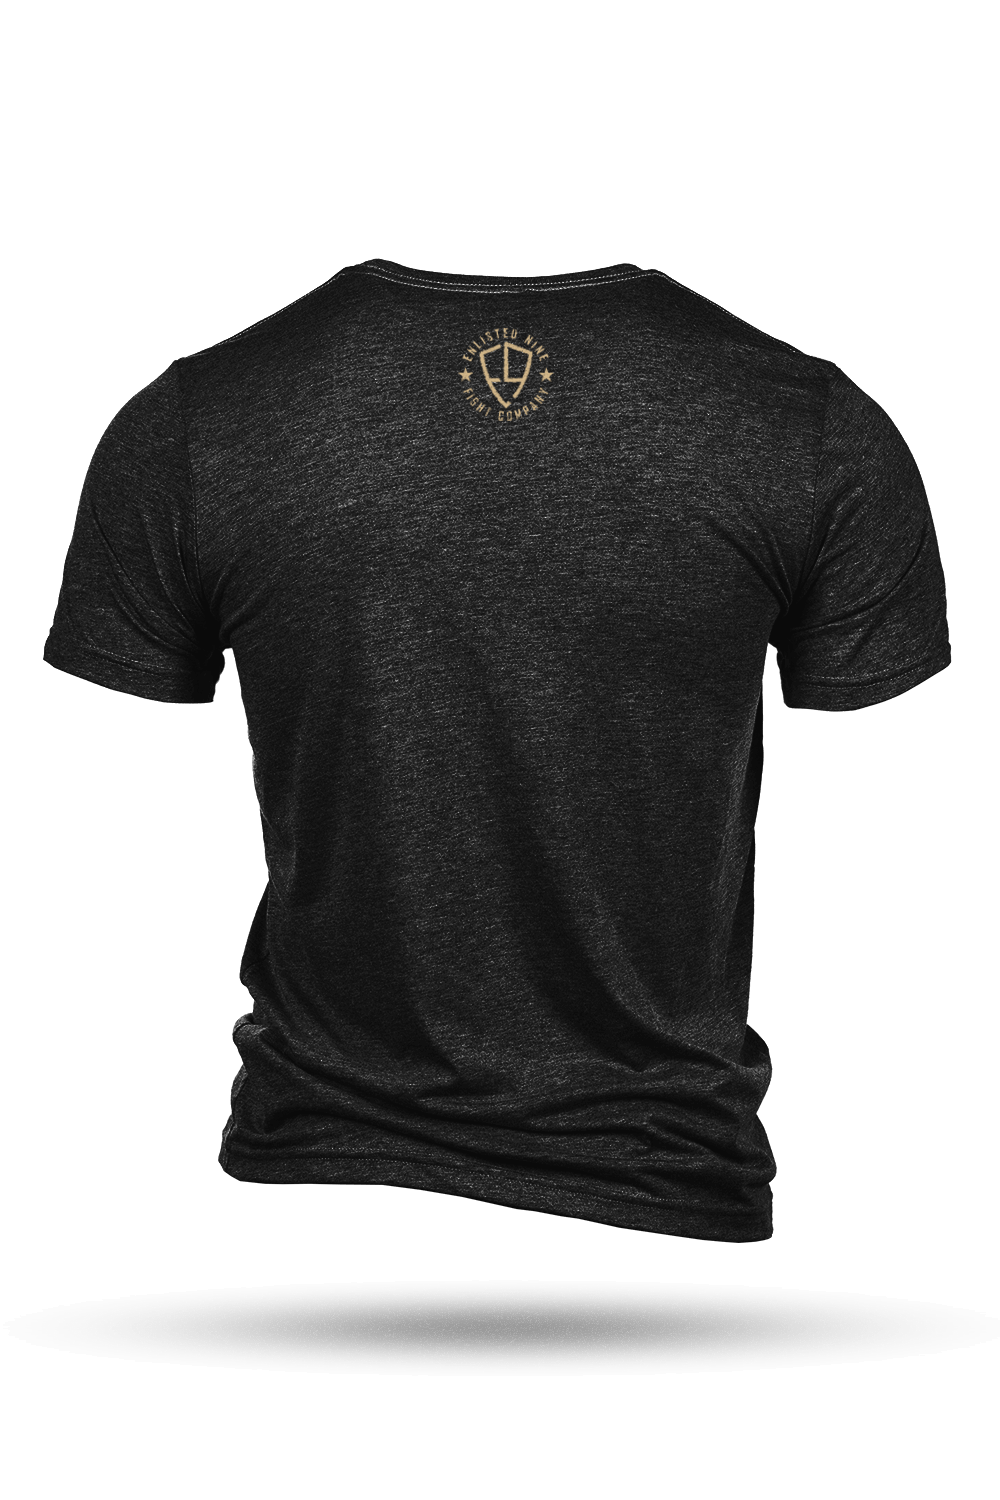 Enlisted 9 - Tri-Blend T-Shirt - Warheads on Foreheads